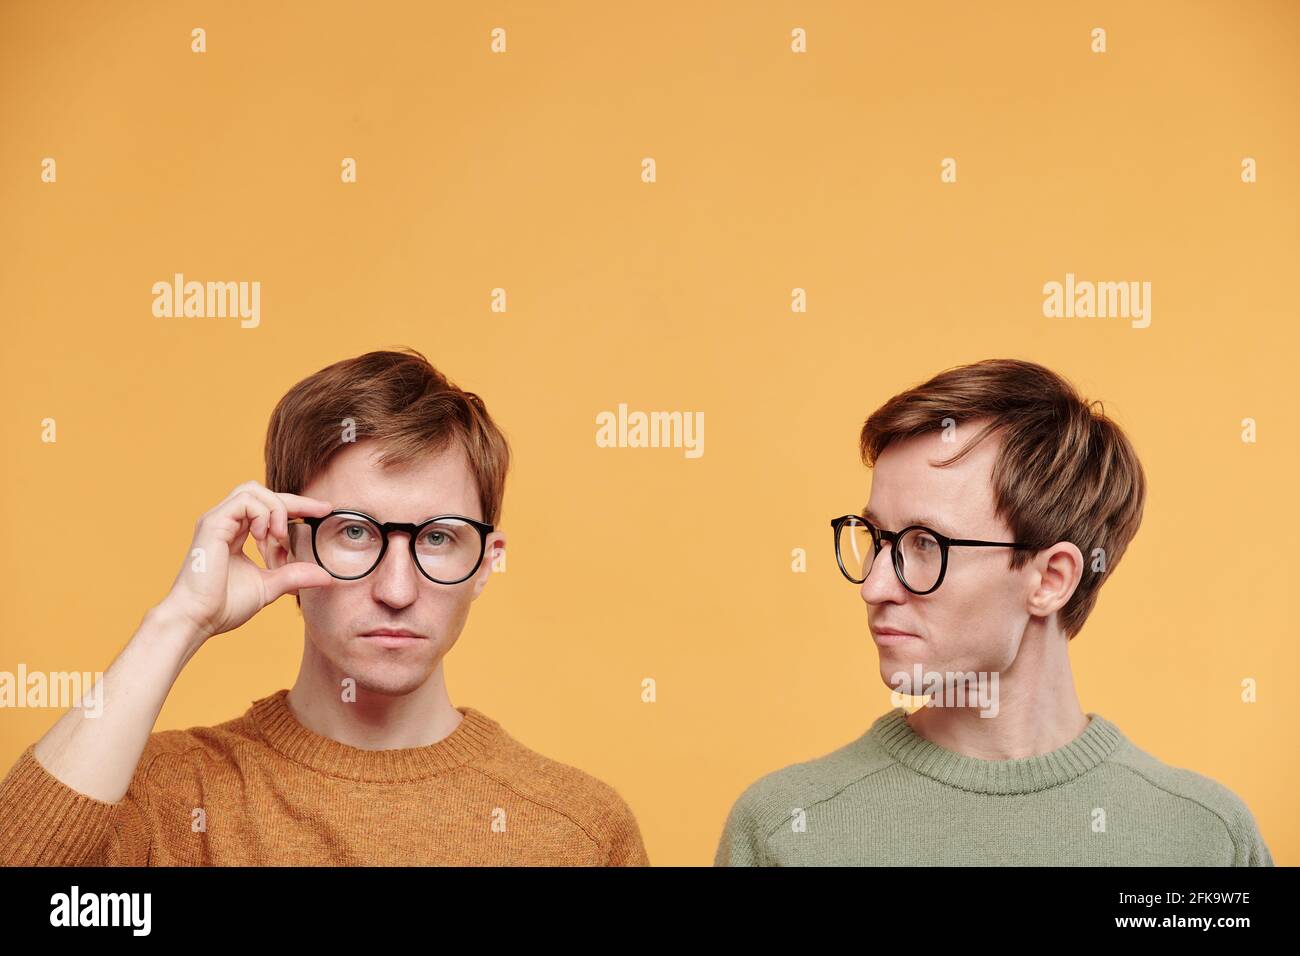 Young fair-haired man in olive sweater looking at brother adjusting glasses against orange background Stock Photo